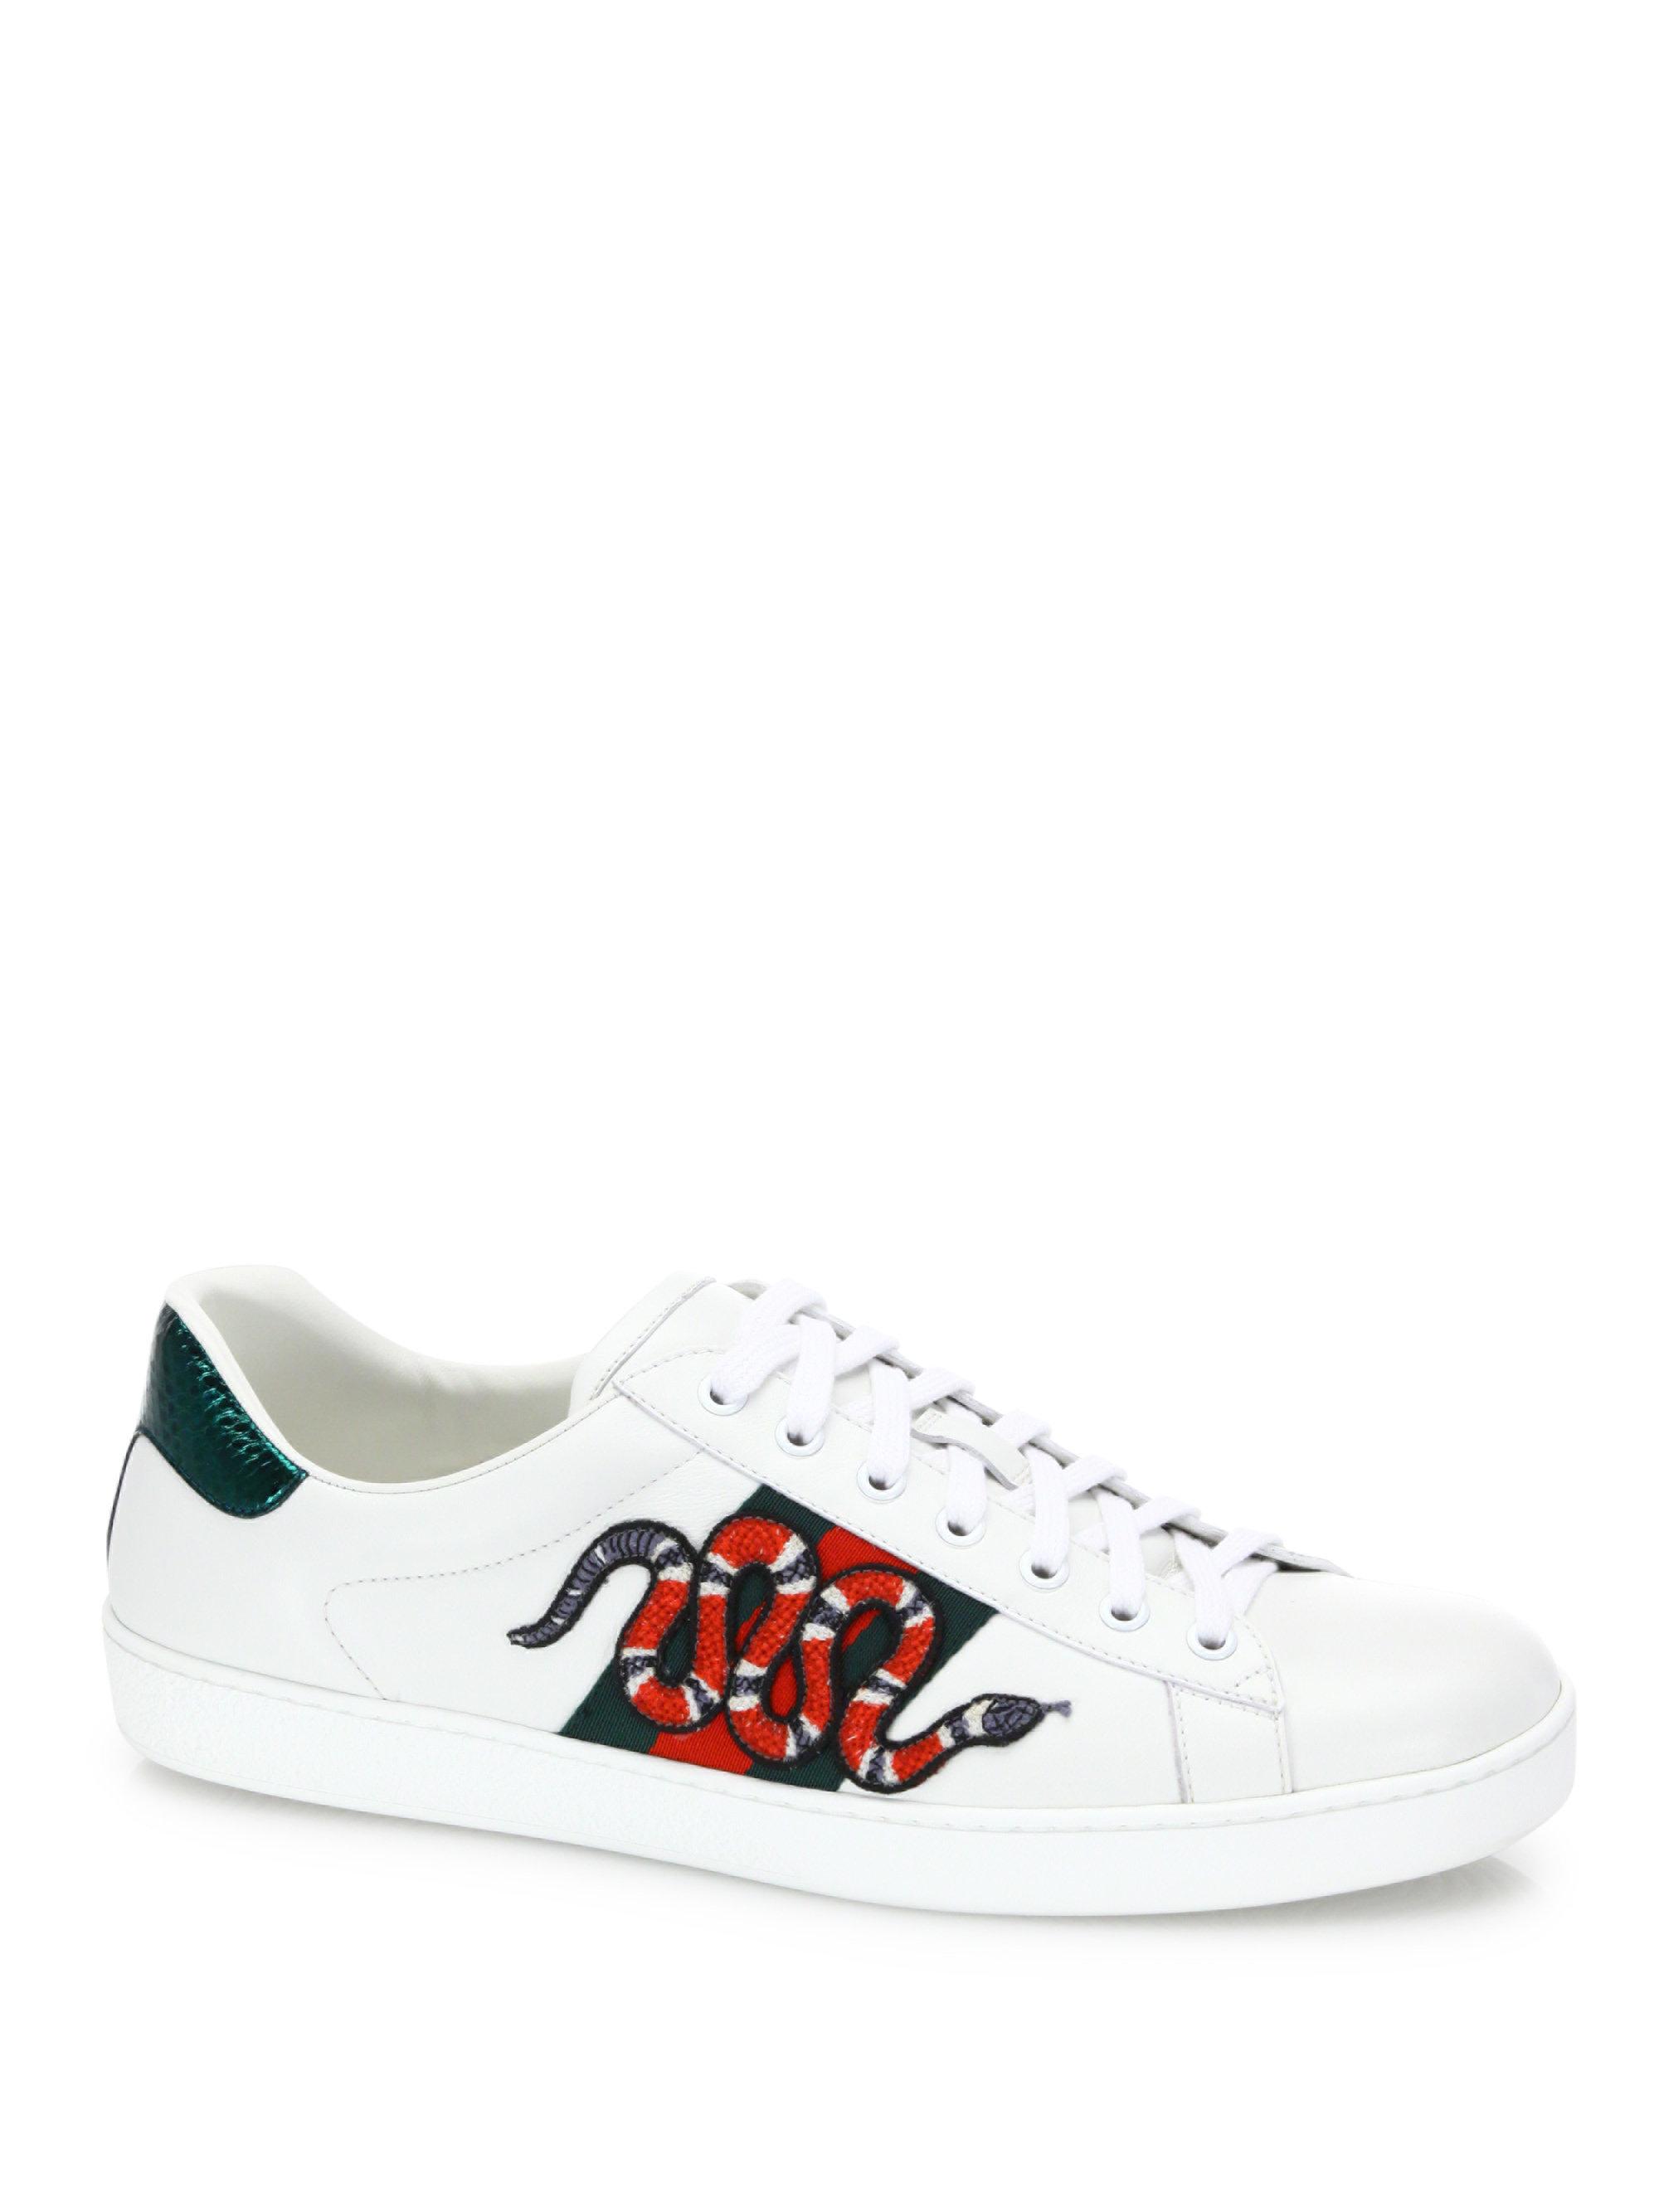 Gucci New Ace Snake Lace-up Sneakers in White | Lyst